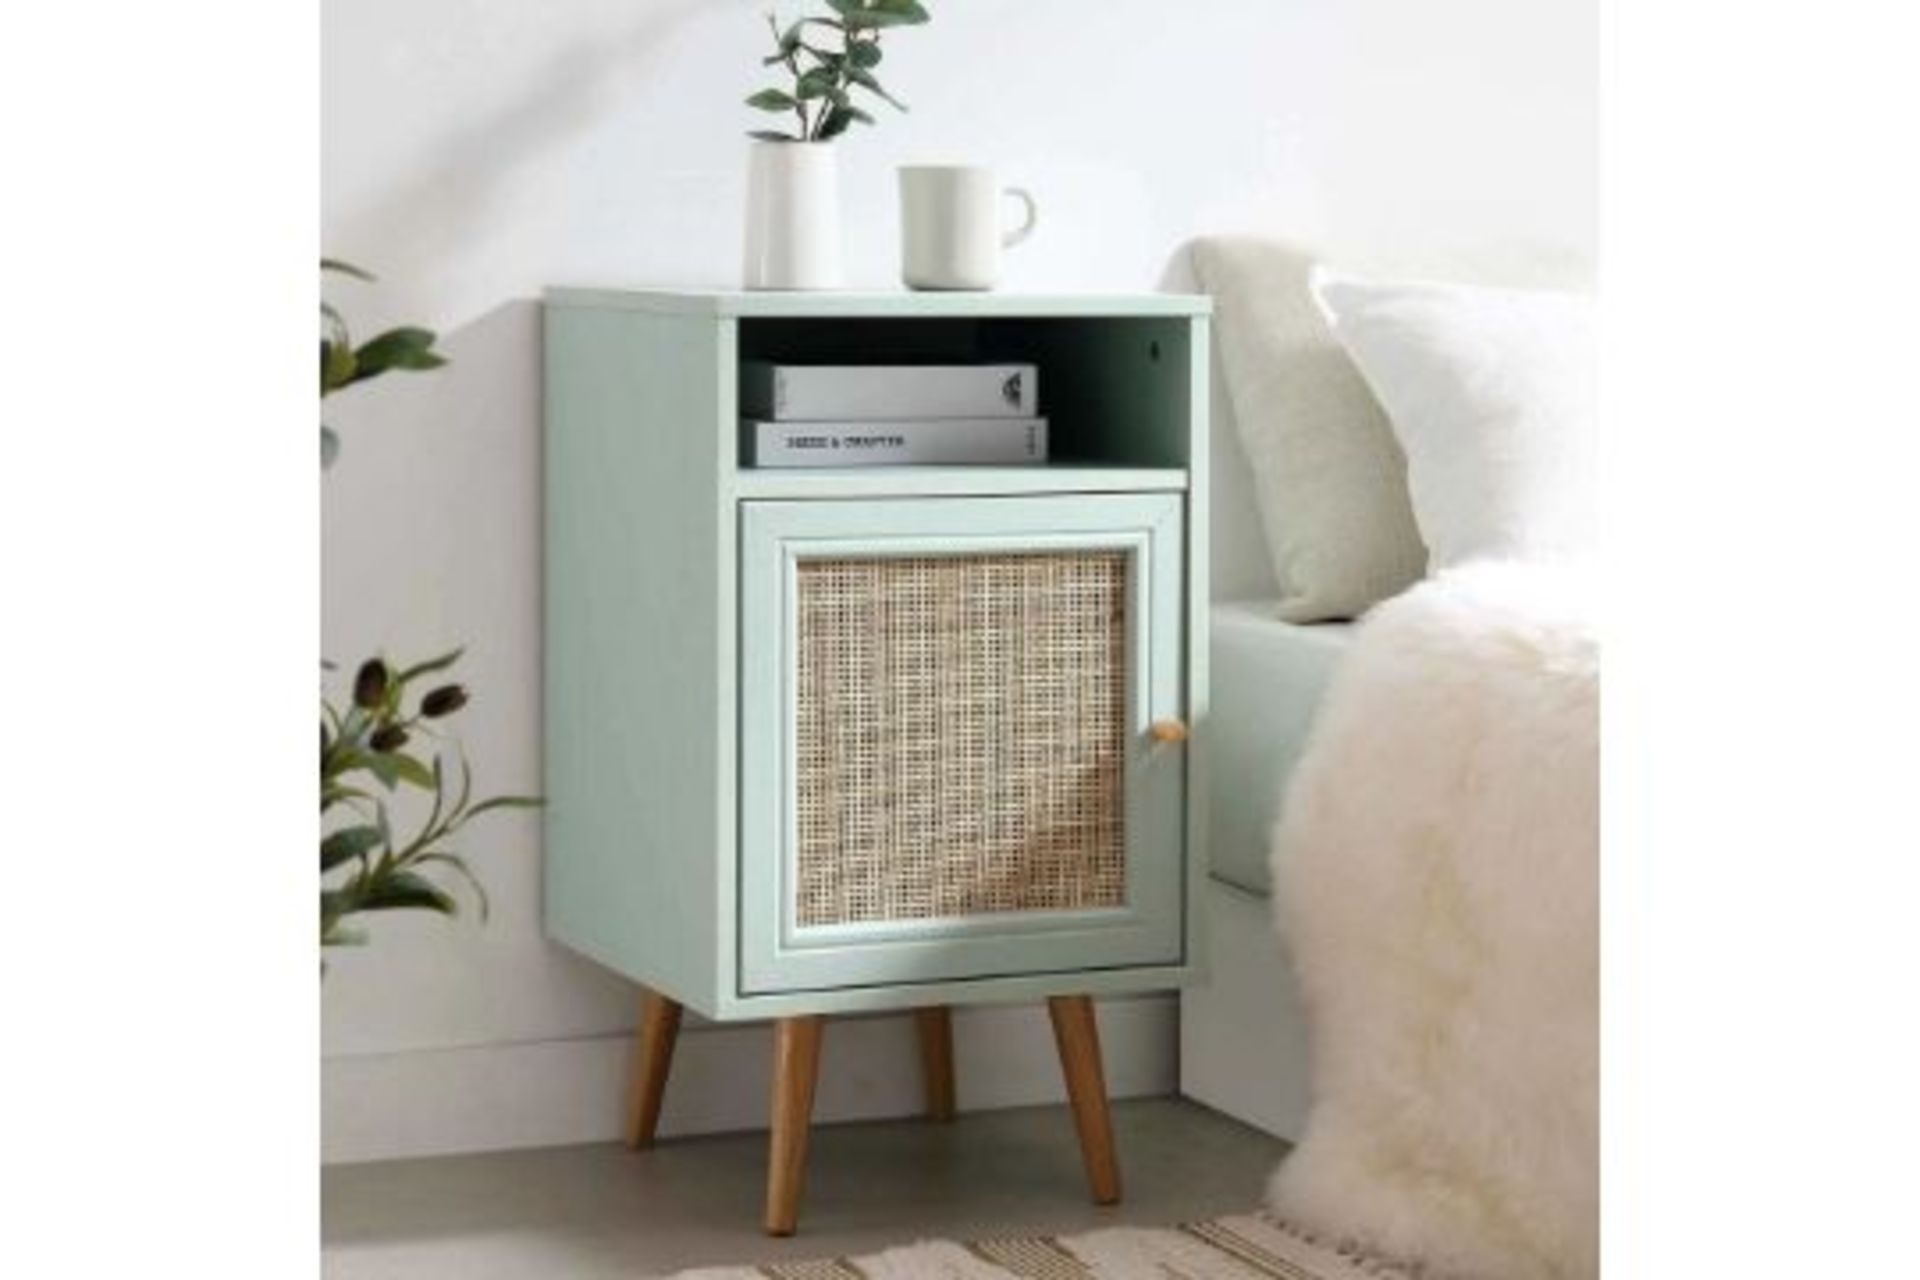 Frances Woven Rattan 1-Door Bedside Table in Mint. - E24. RRP £159.99. Our Frances bedside table